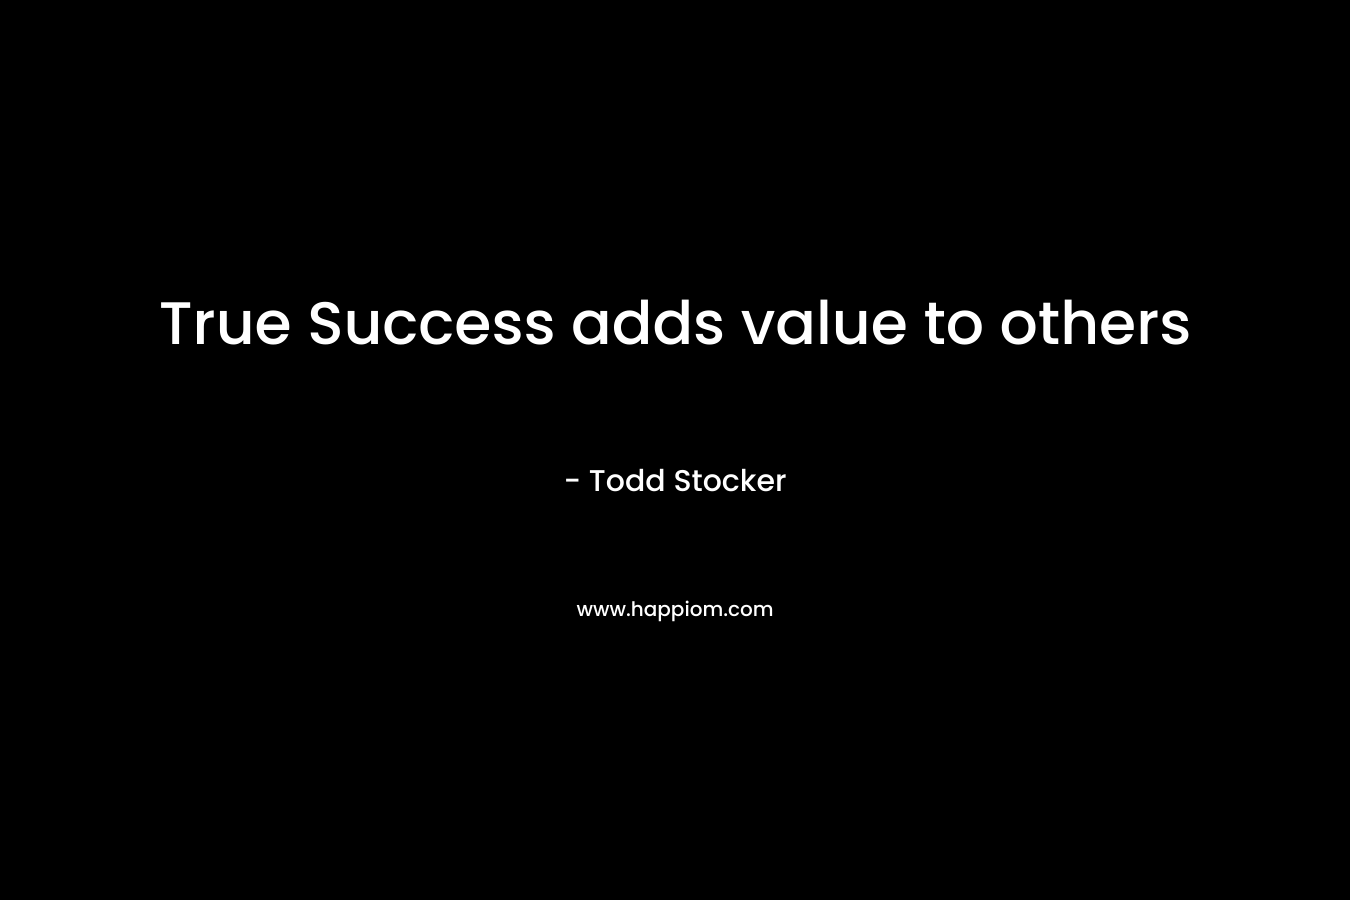 True Success adds value to others